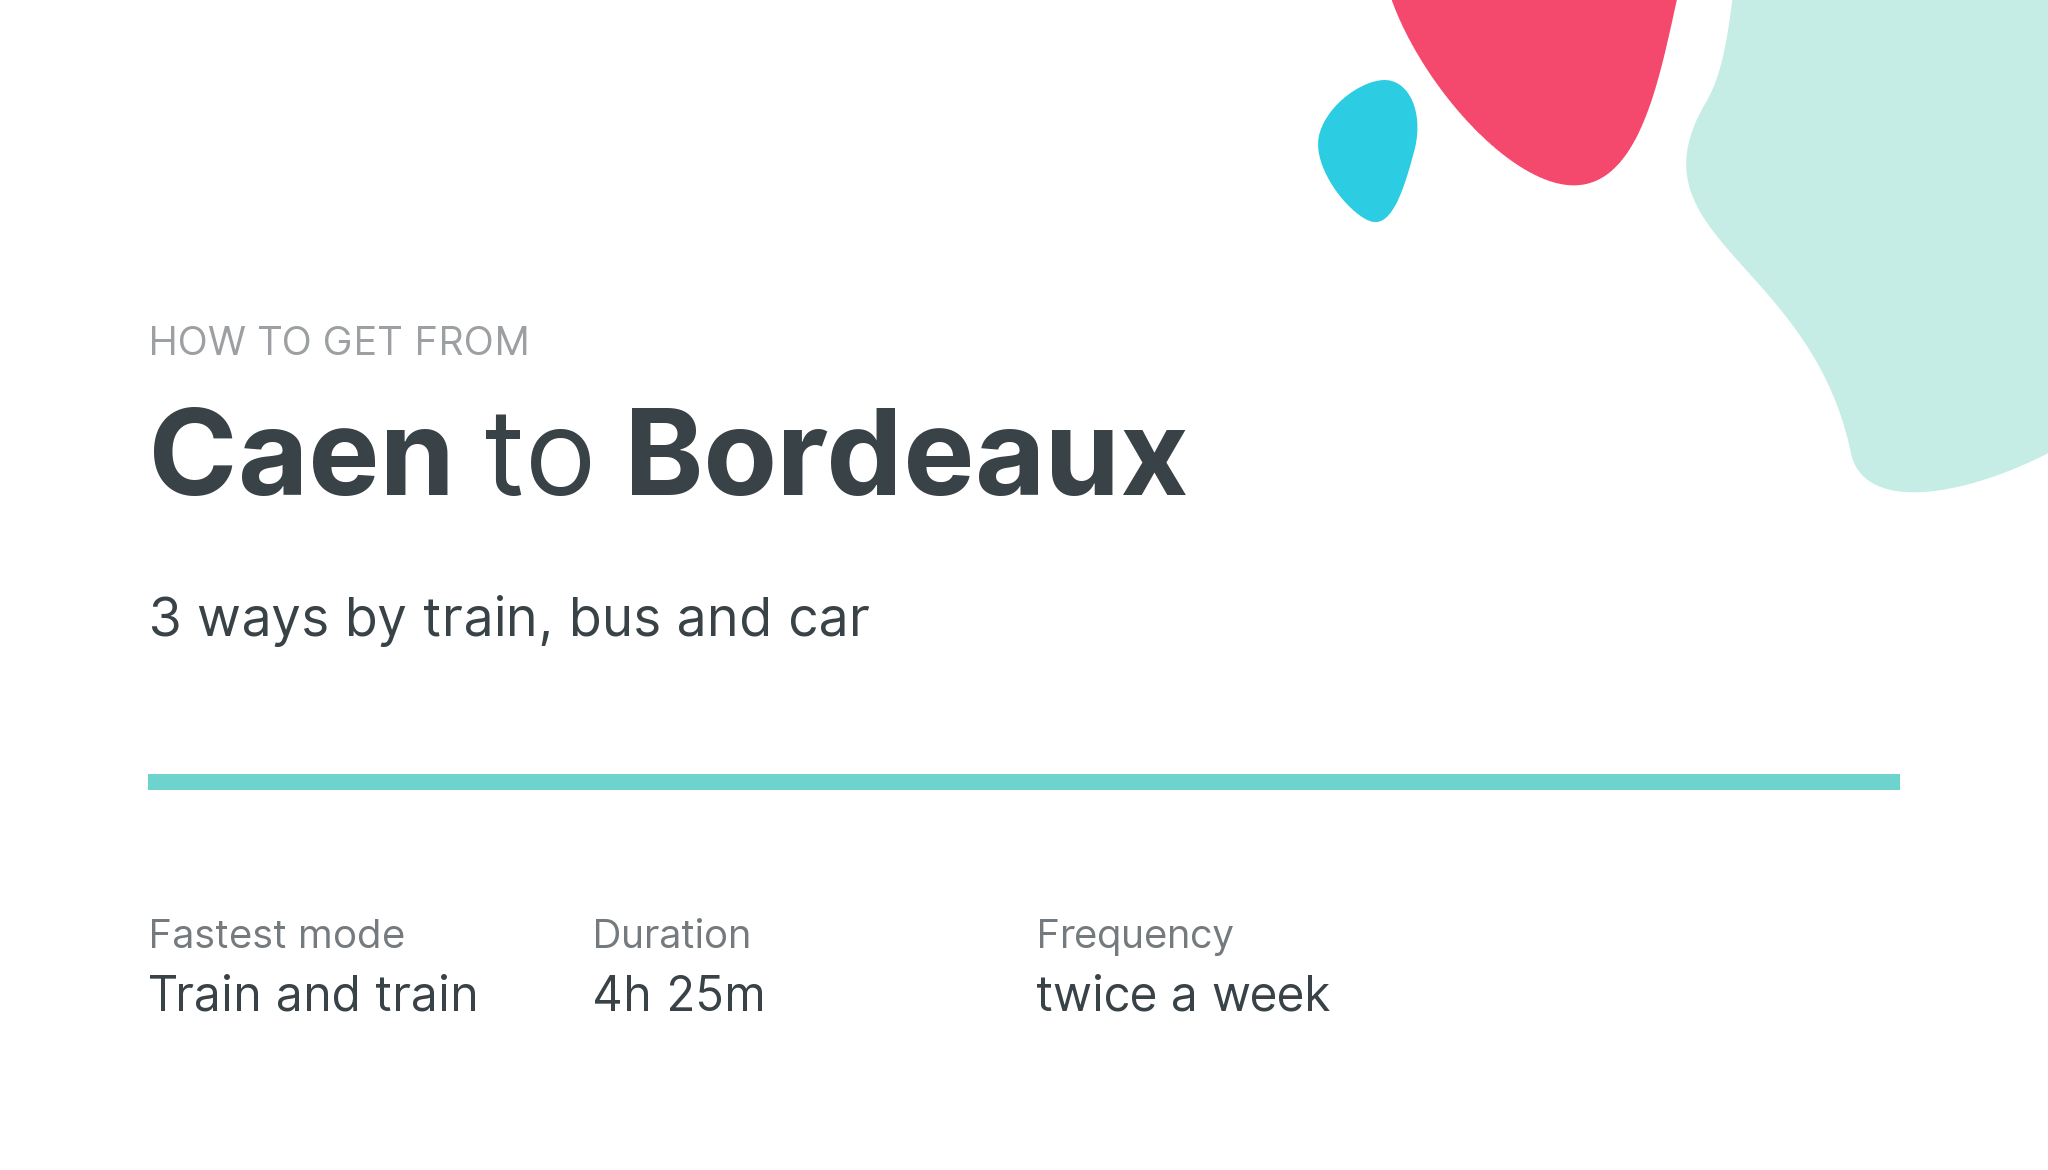 How do I get from Caen to Bordeaux